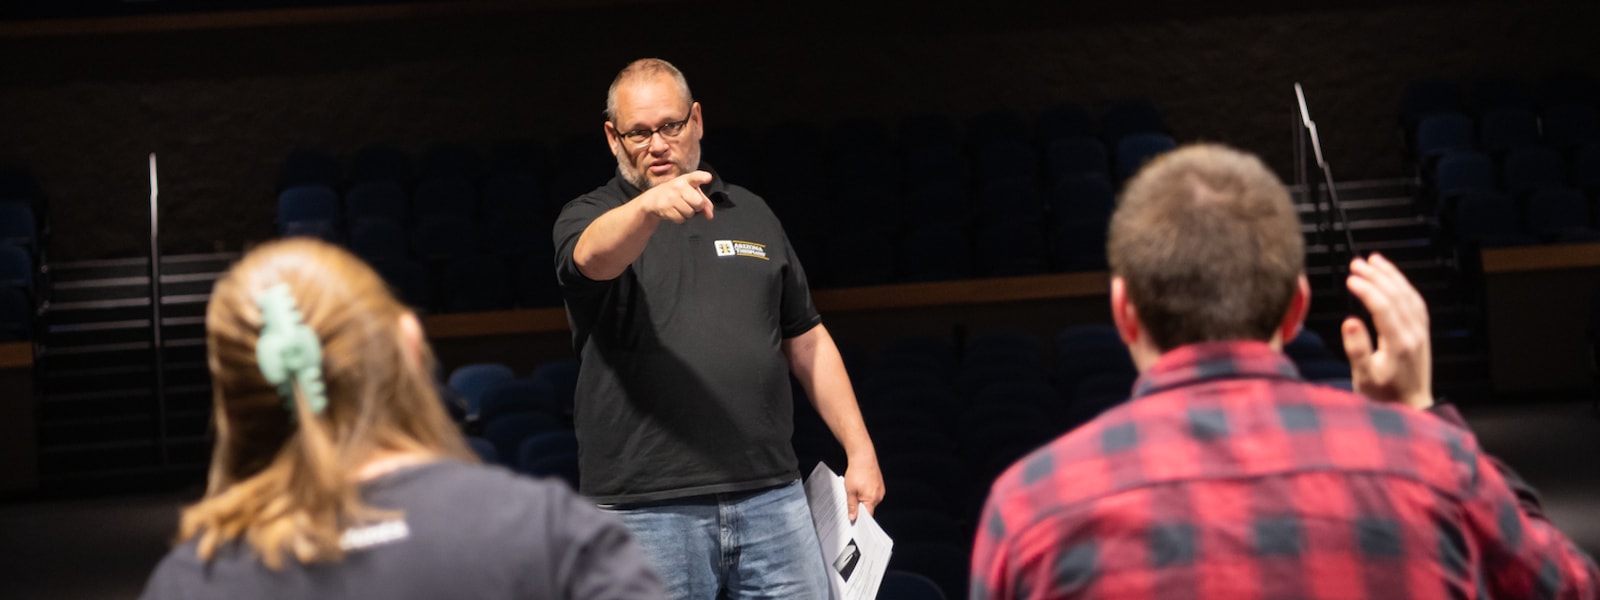 Steve Wallgren, Willow Canyon High School Theatre Teacher, speaks with students in the performing arts center.